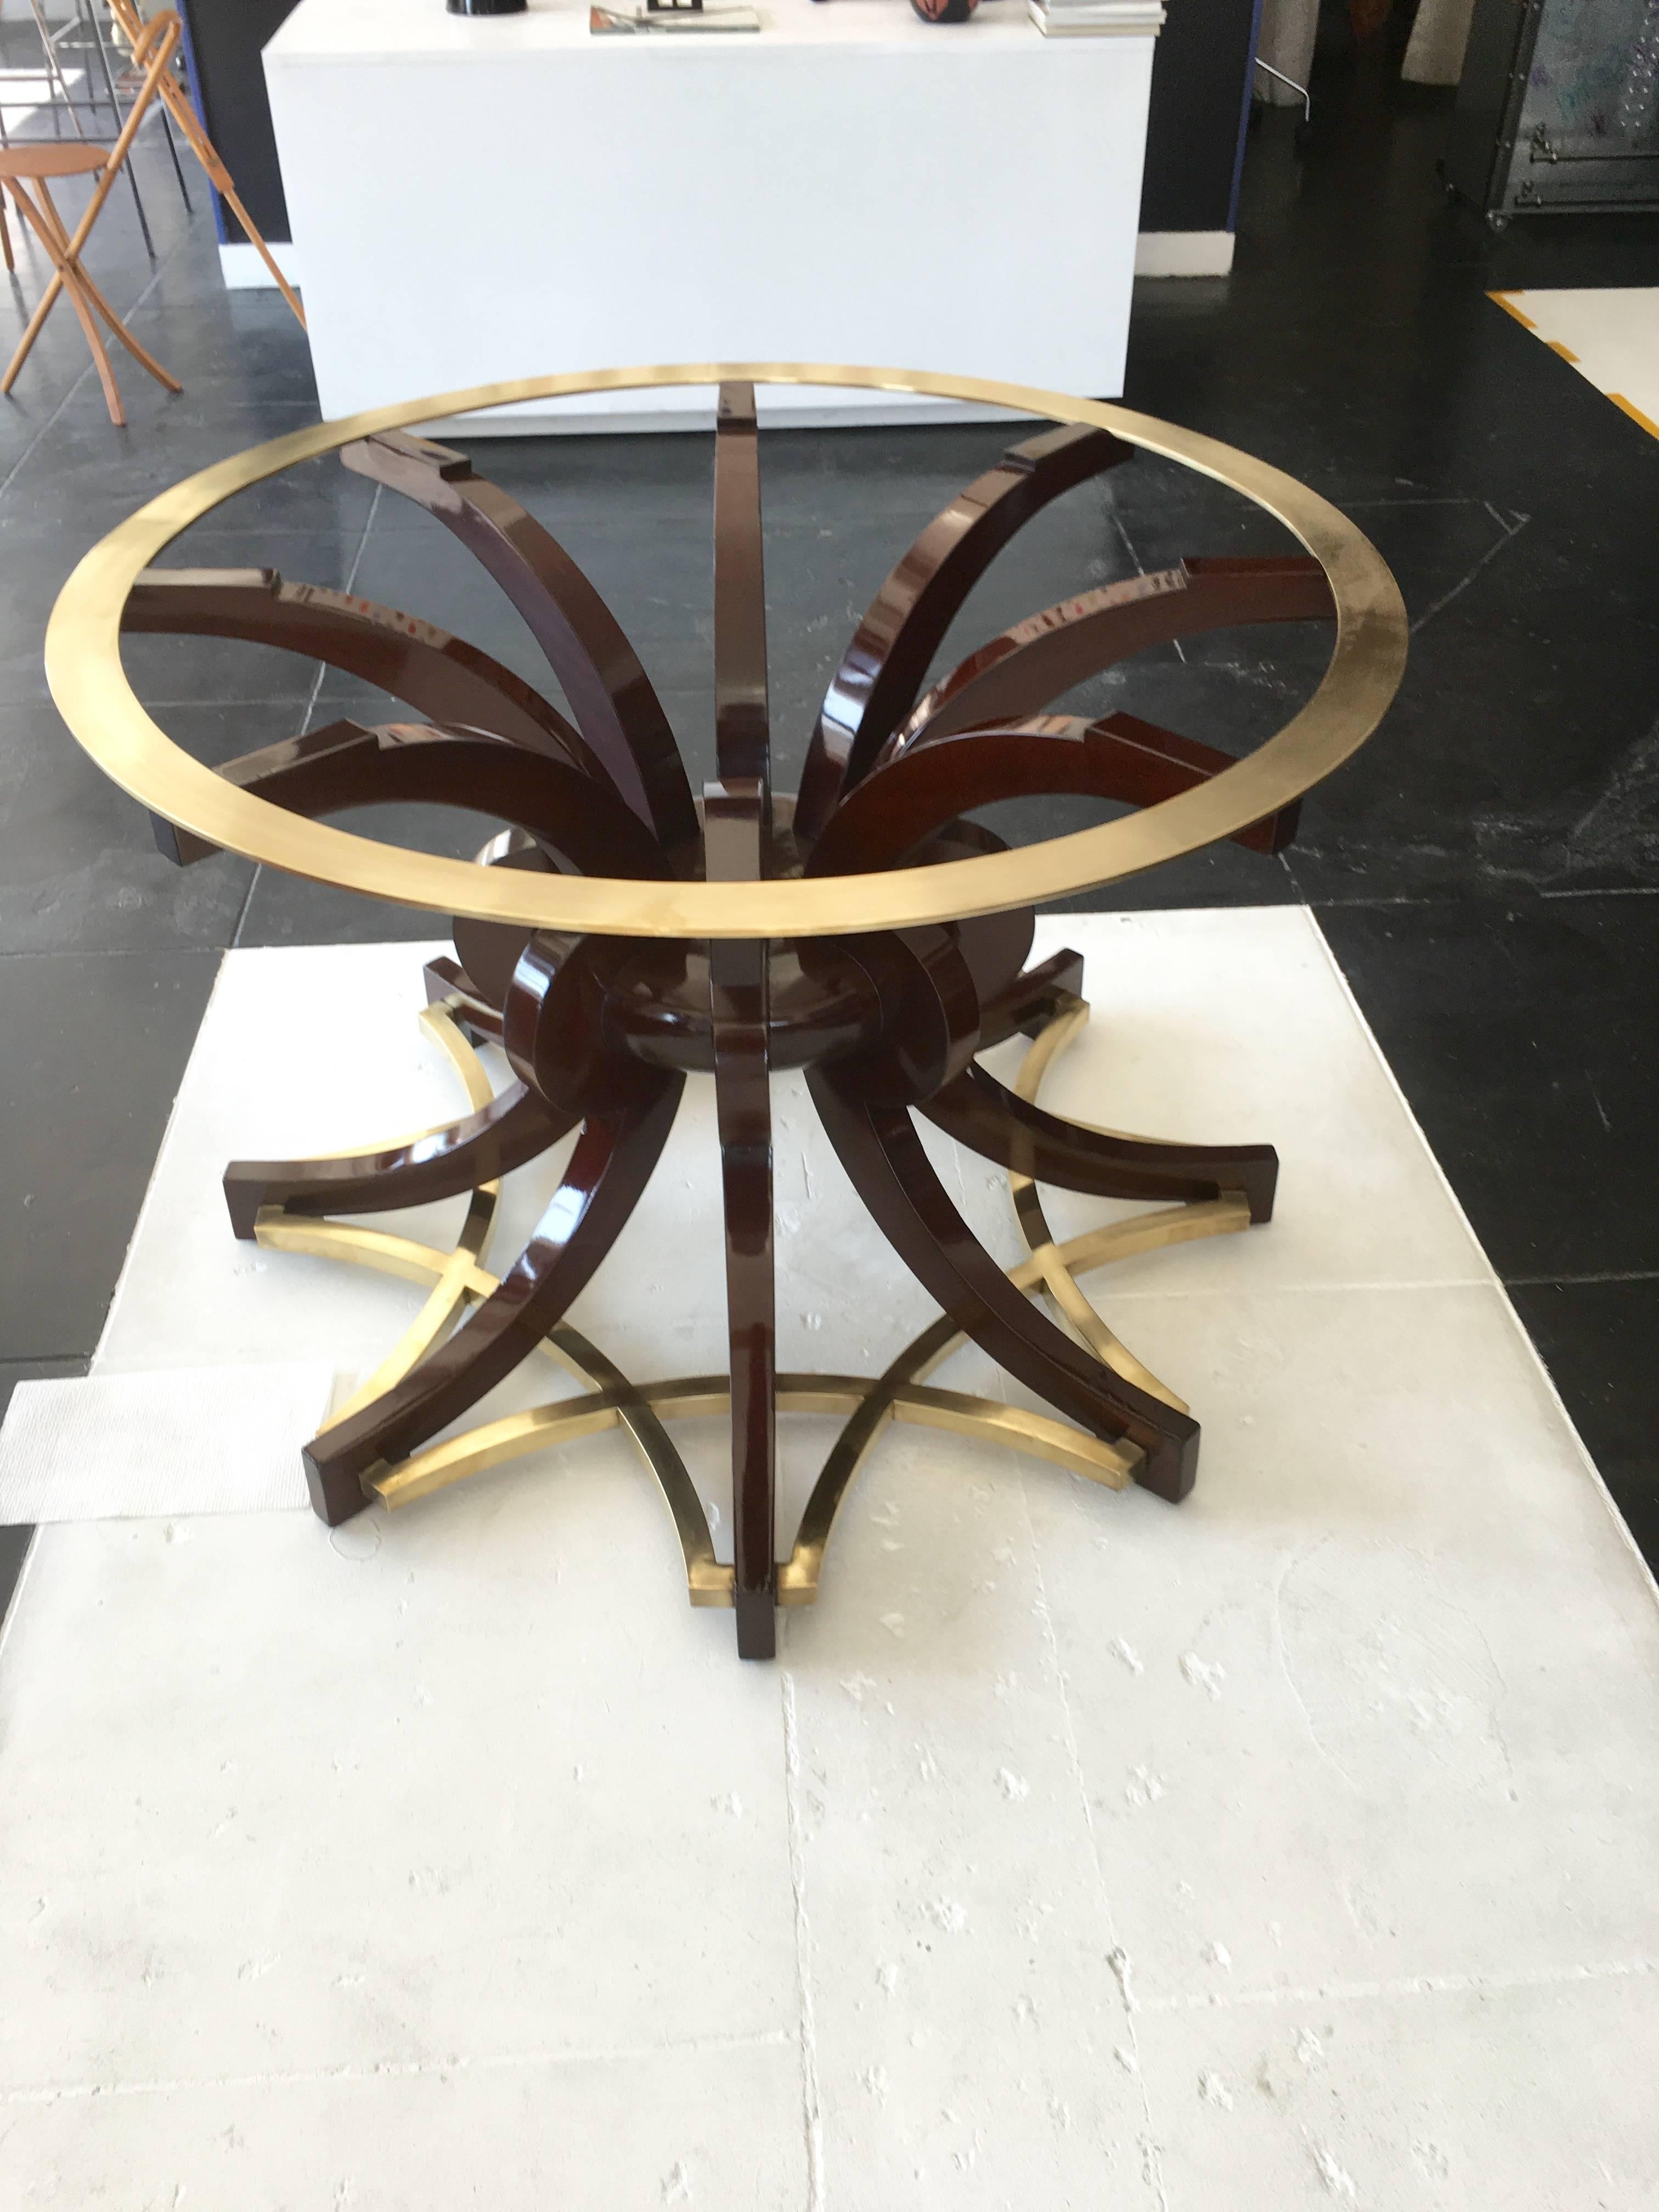 Roberto and Mito Block Midcentury mahogany and brass center table with 3/4 thick glass top.